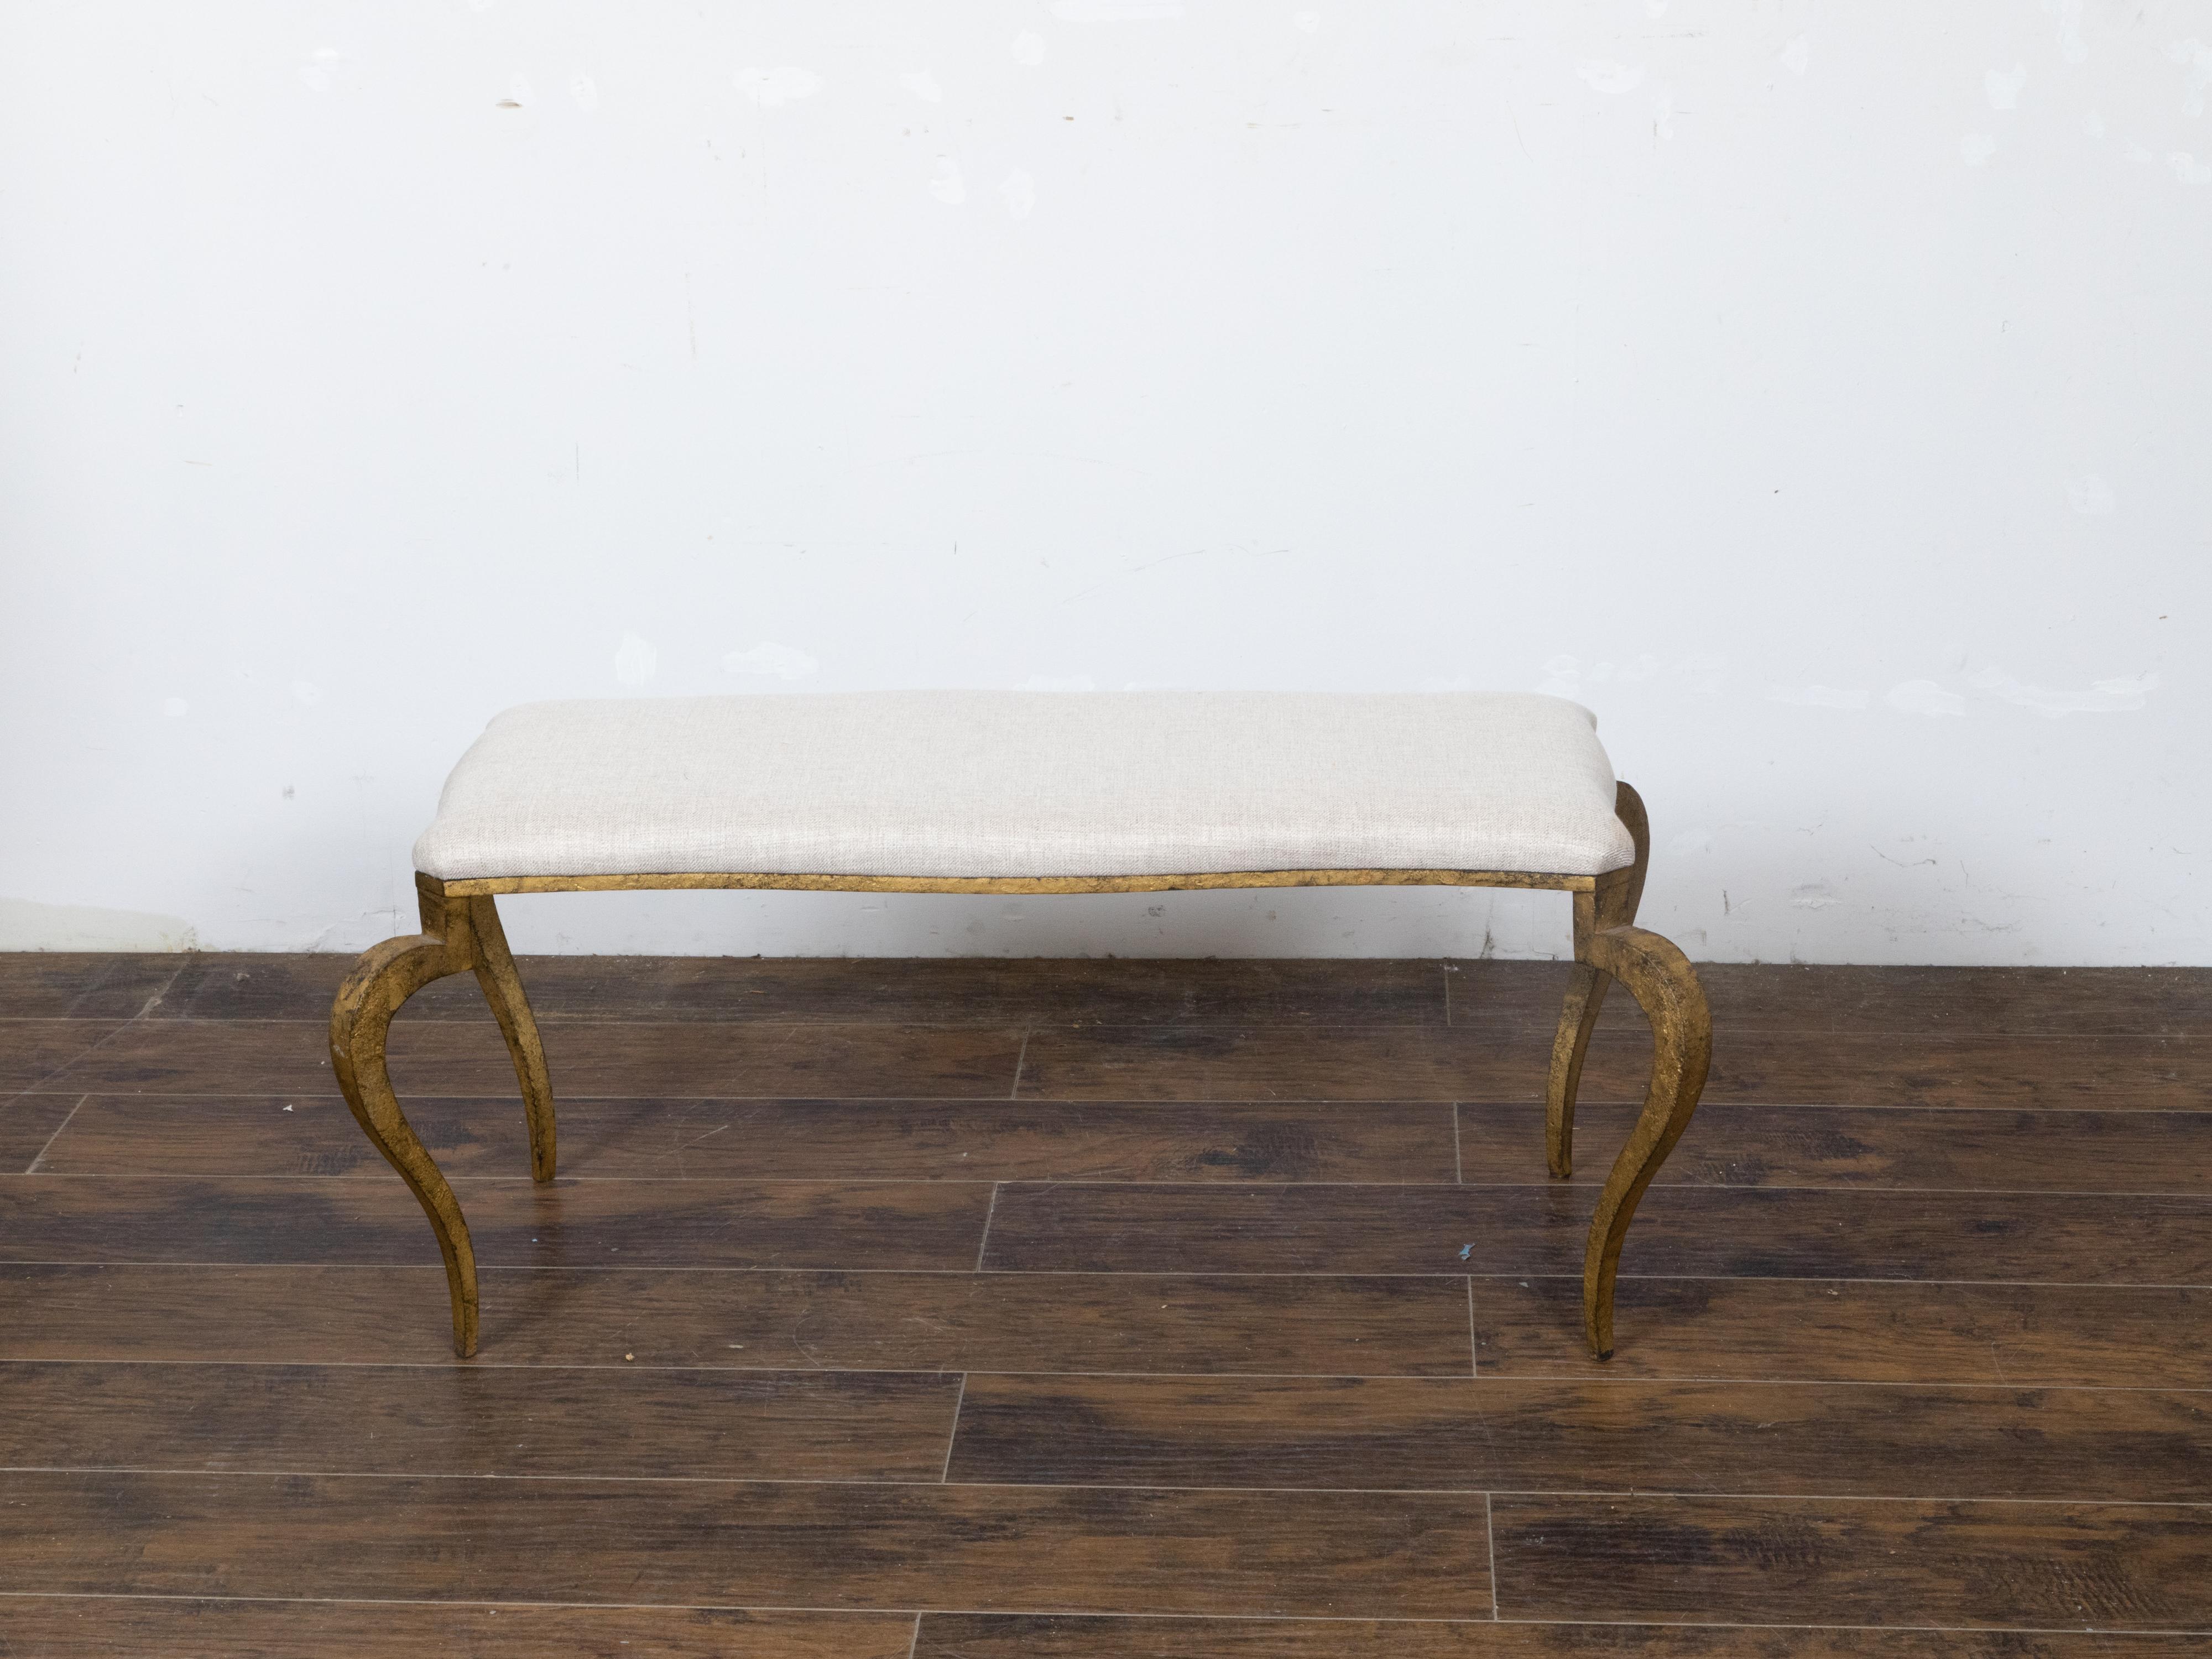 Art Deco French Gilt Iron Bench with Curving Legs and New Linen Upholstery For Sale 2